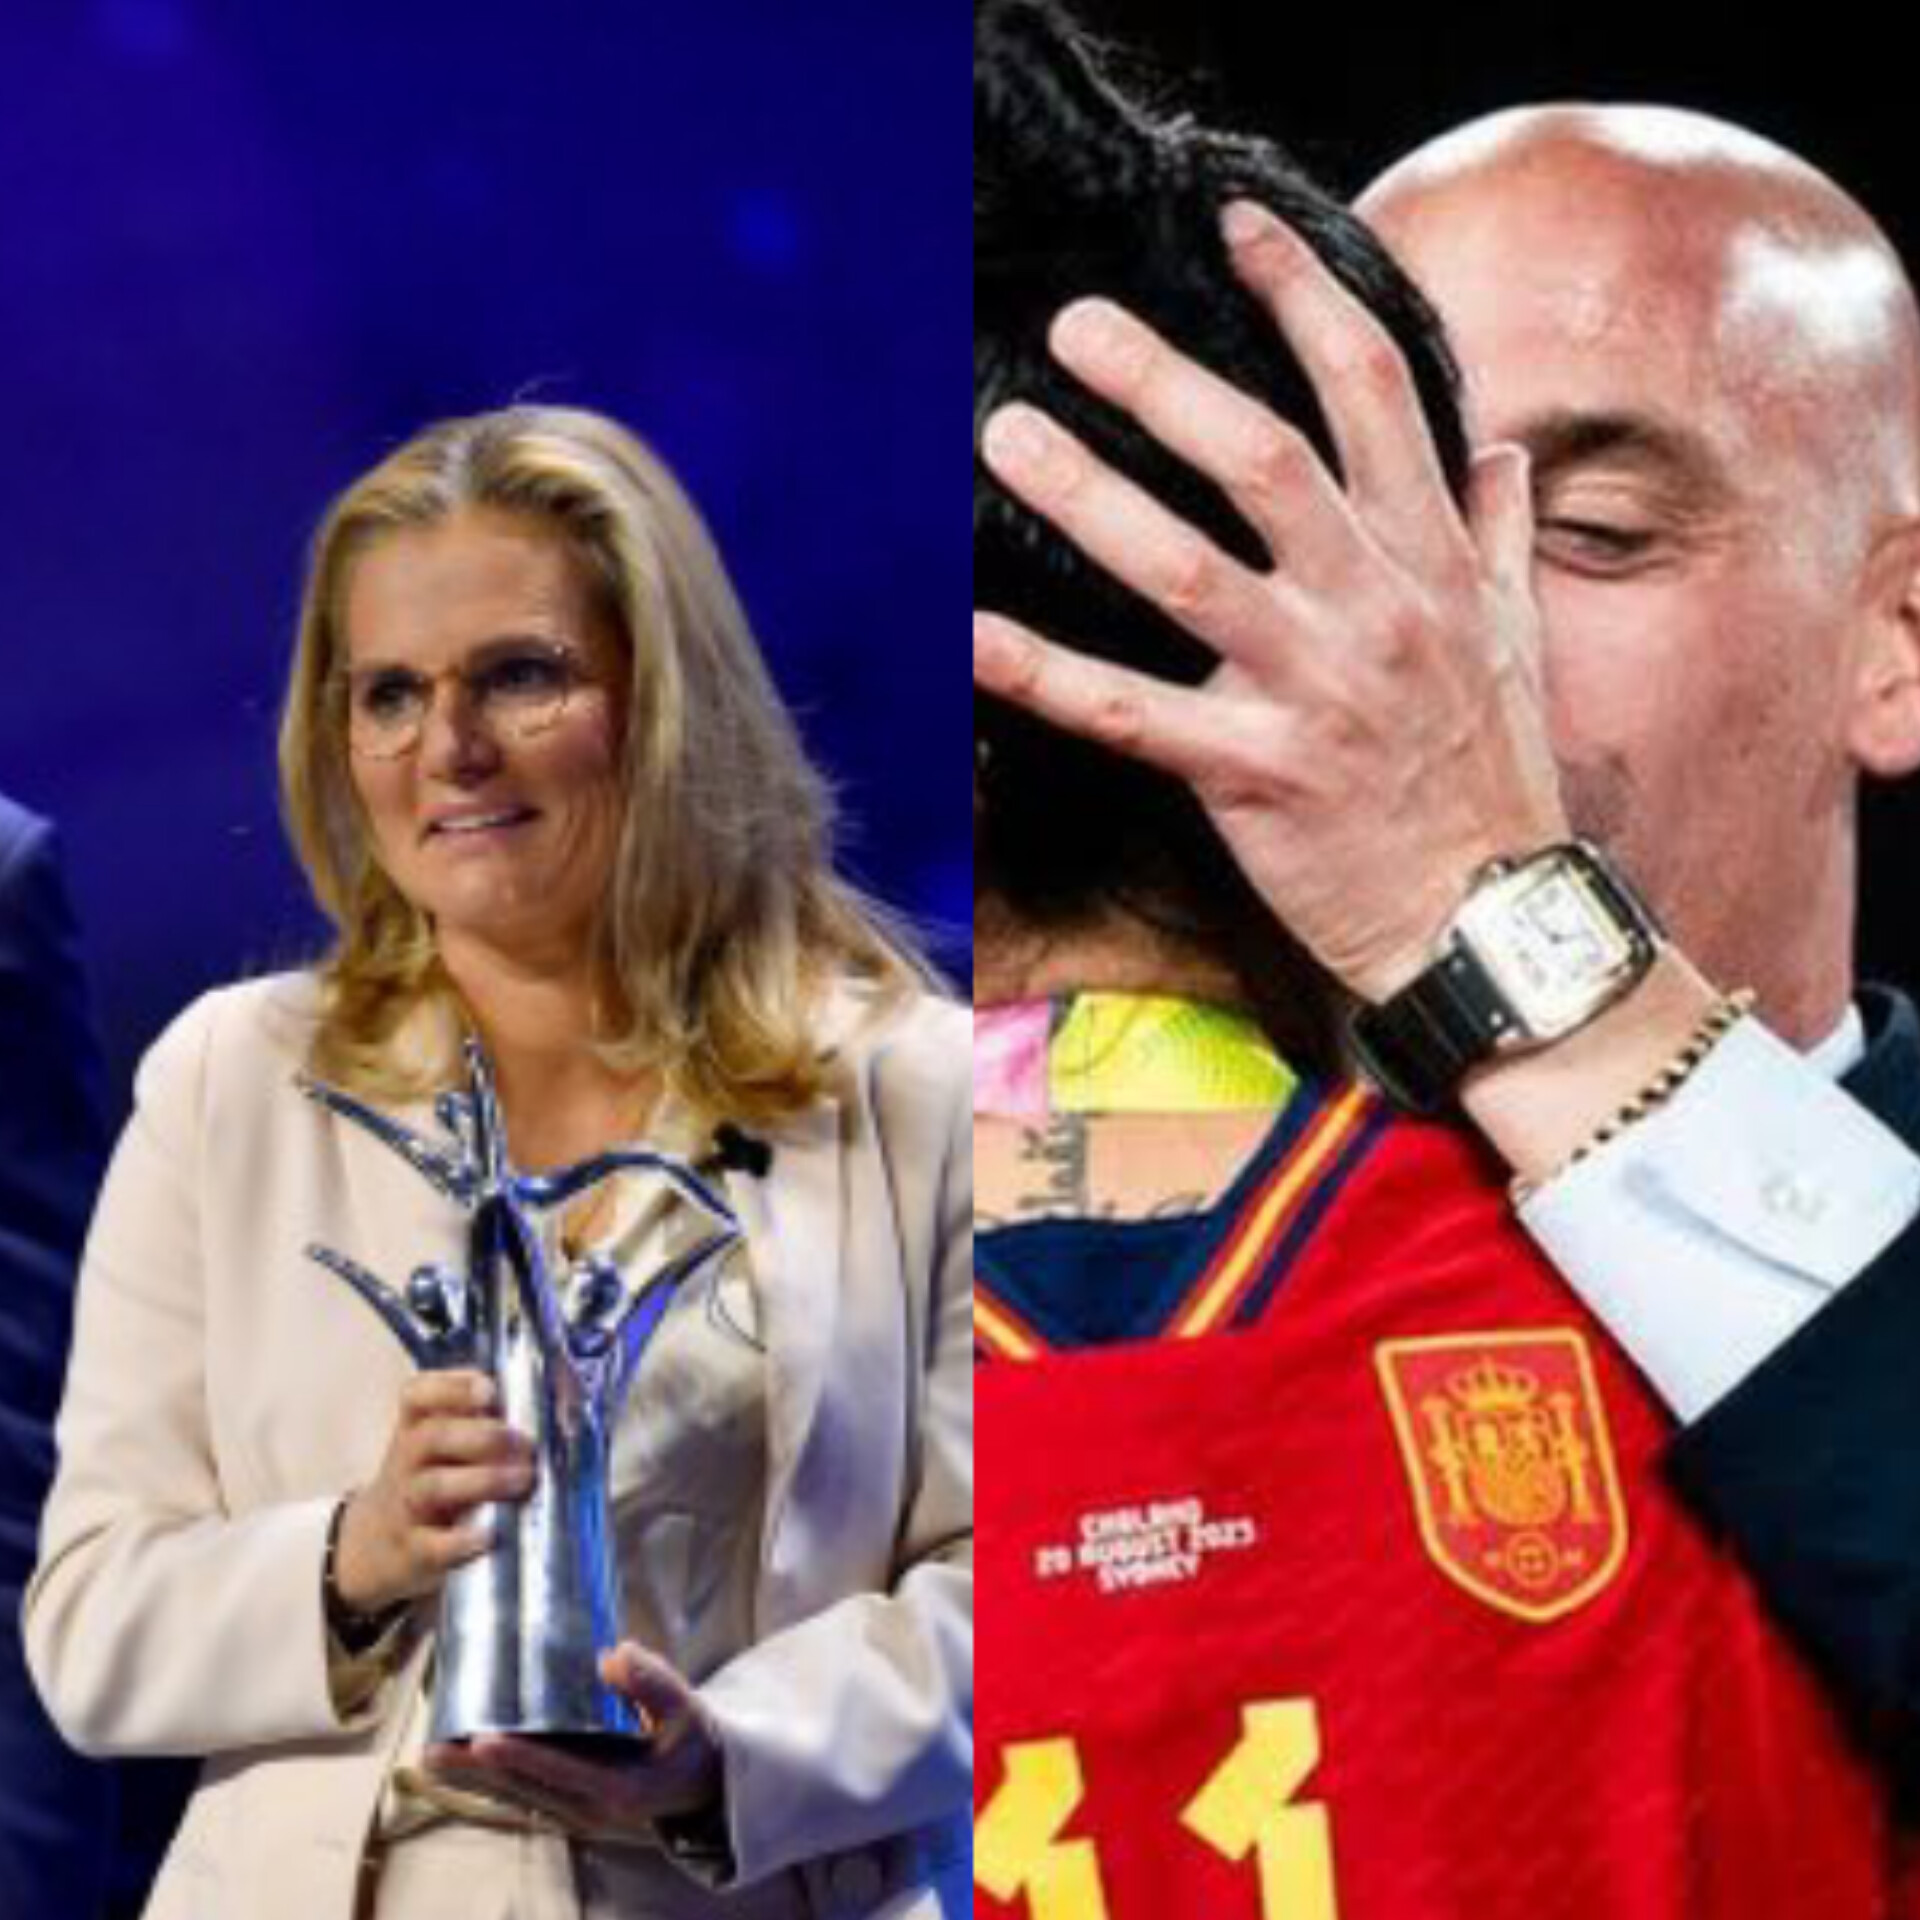 Kiss gate: Sarina Wiegman chides Spanish FA and Luis Rubiales after receiving UEFA Women award